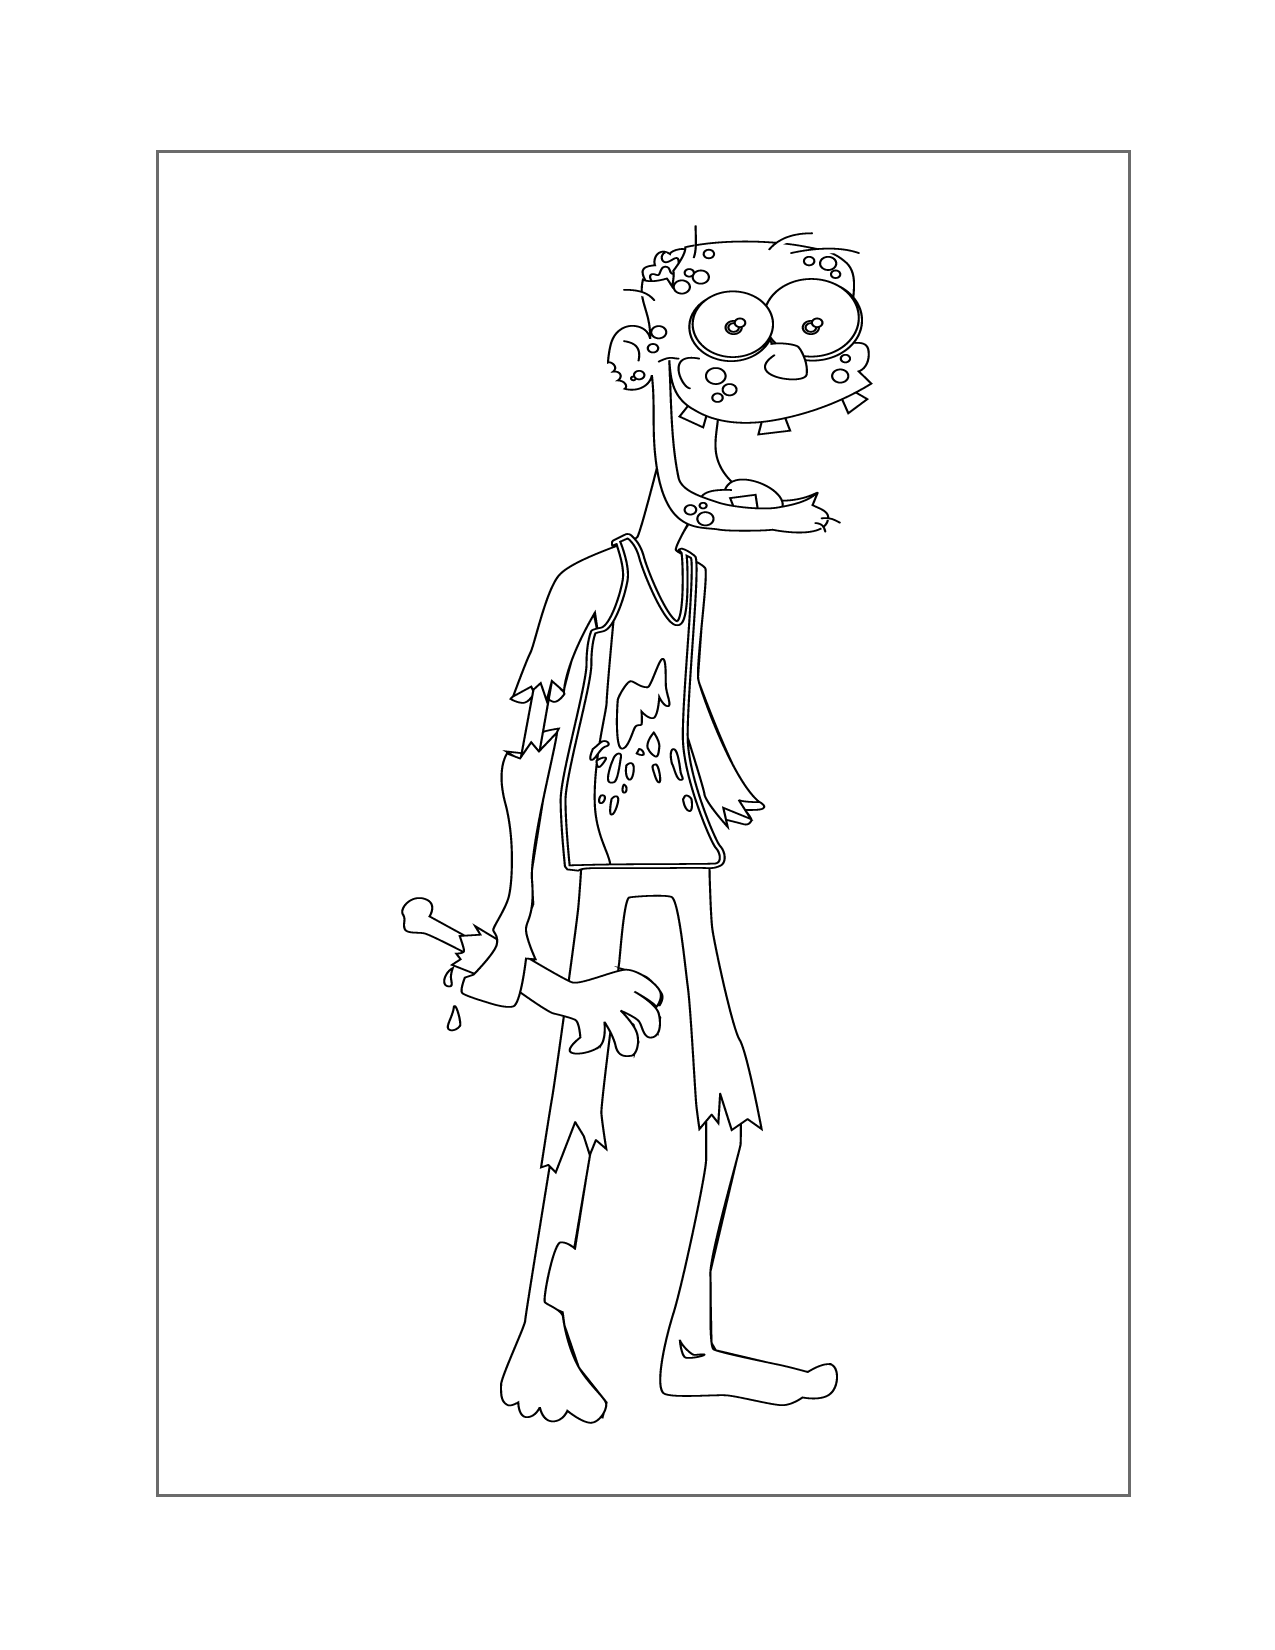 Funny Zombie Coloring Page